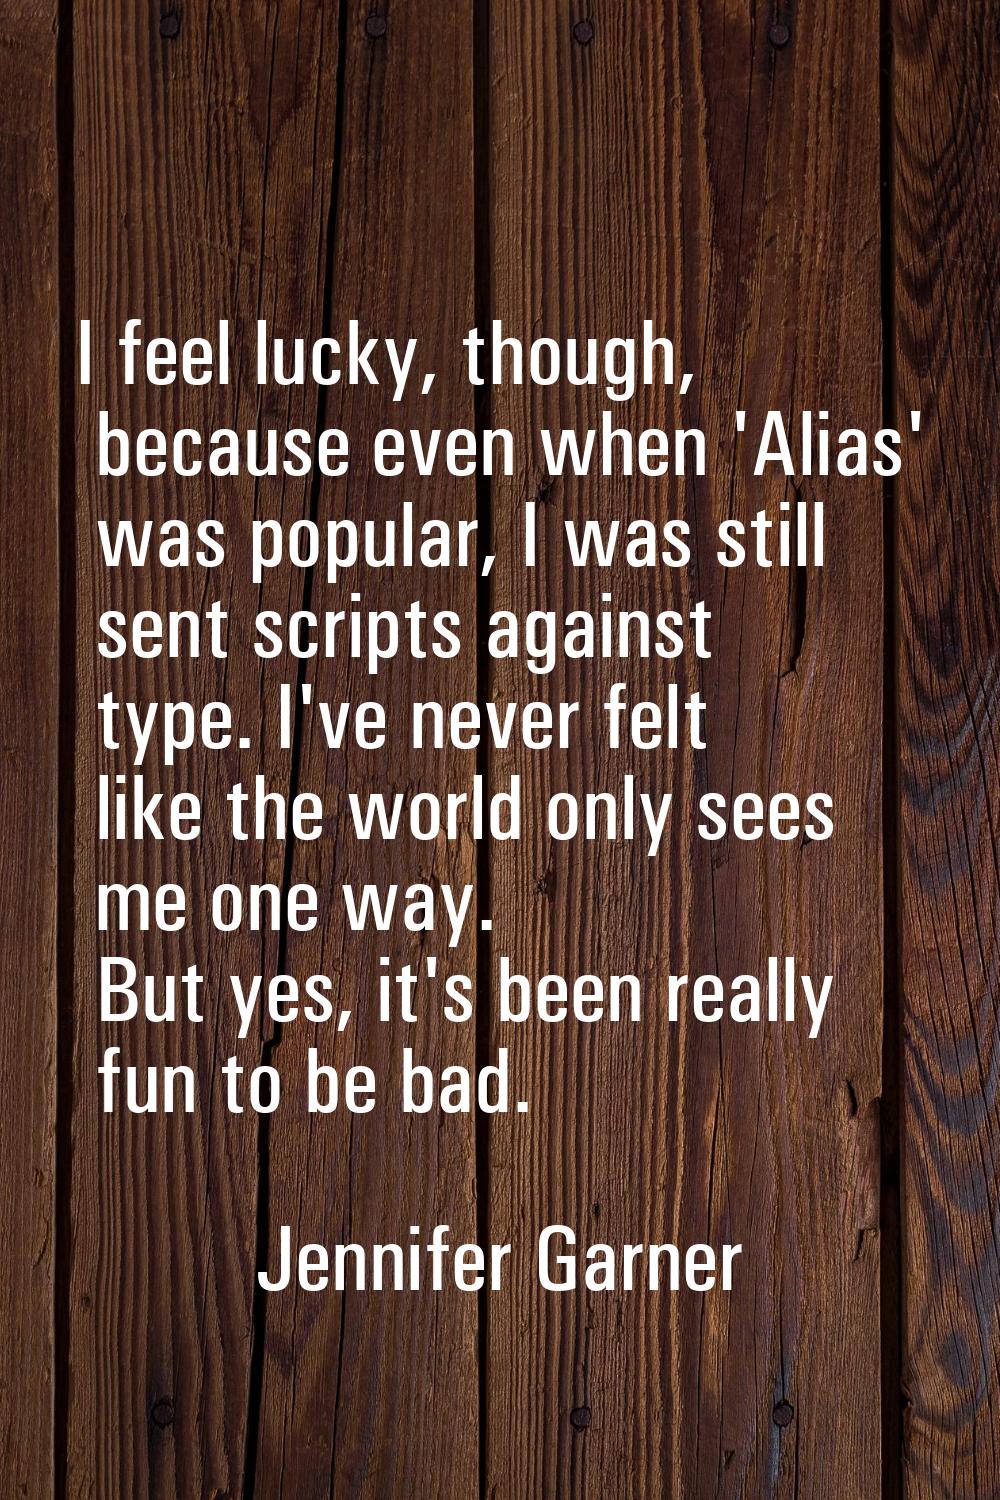 I feel lucky, though, because even when 'Alias' was popular, I was still sent scripts against type.